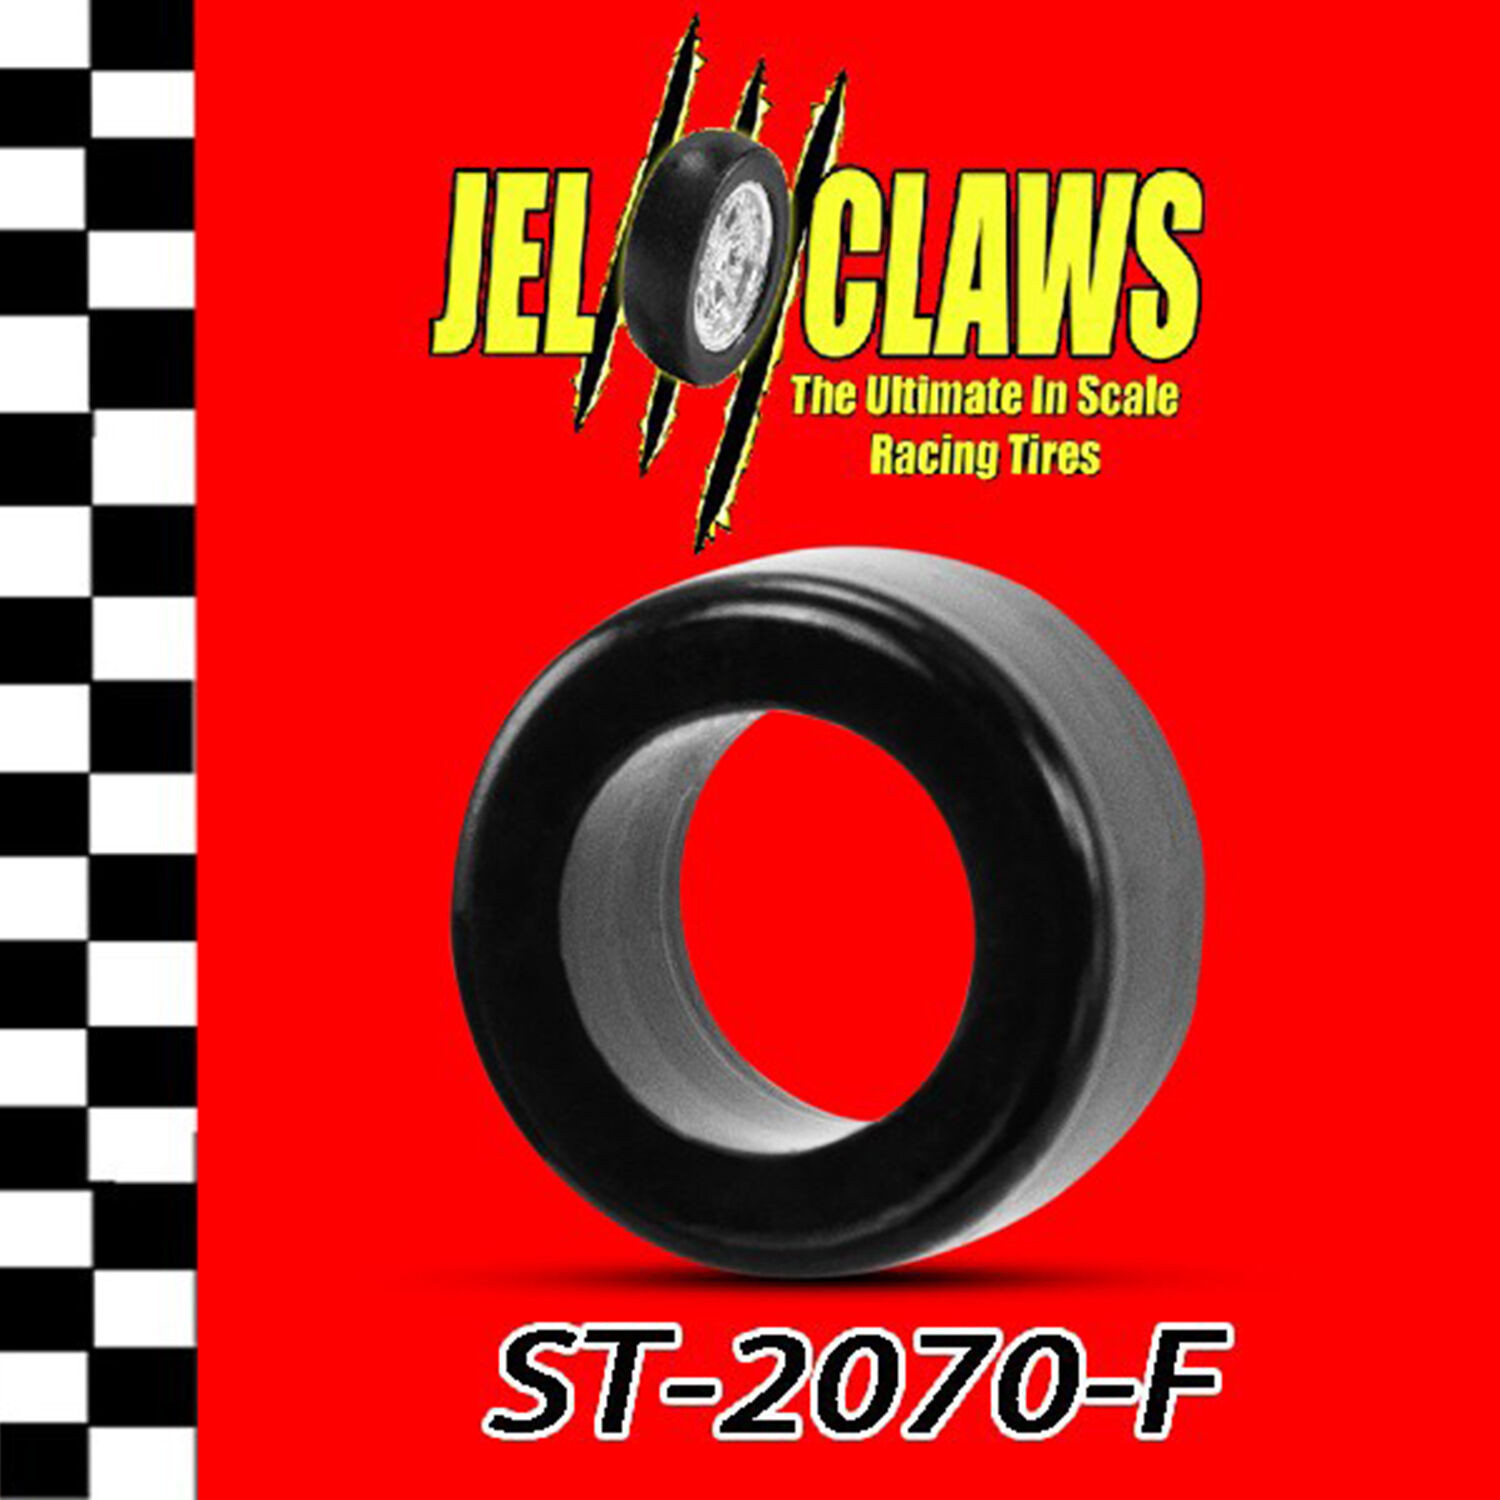 ST 2070-F 1/64 HO Scale Slot Car Tire for Tyco Magnum 440-X2, Mega G, Tomy AFX Turbo - Fronts